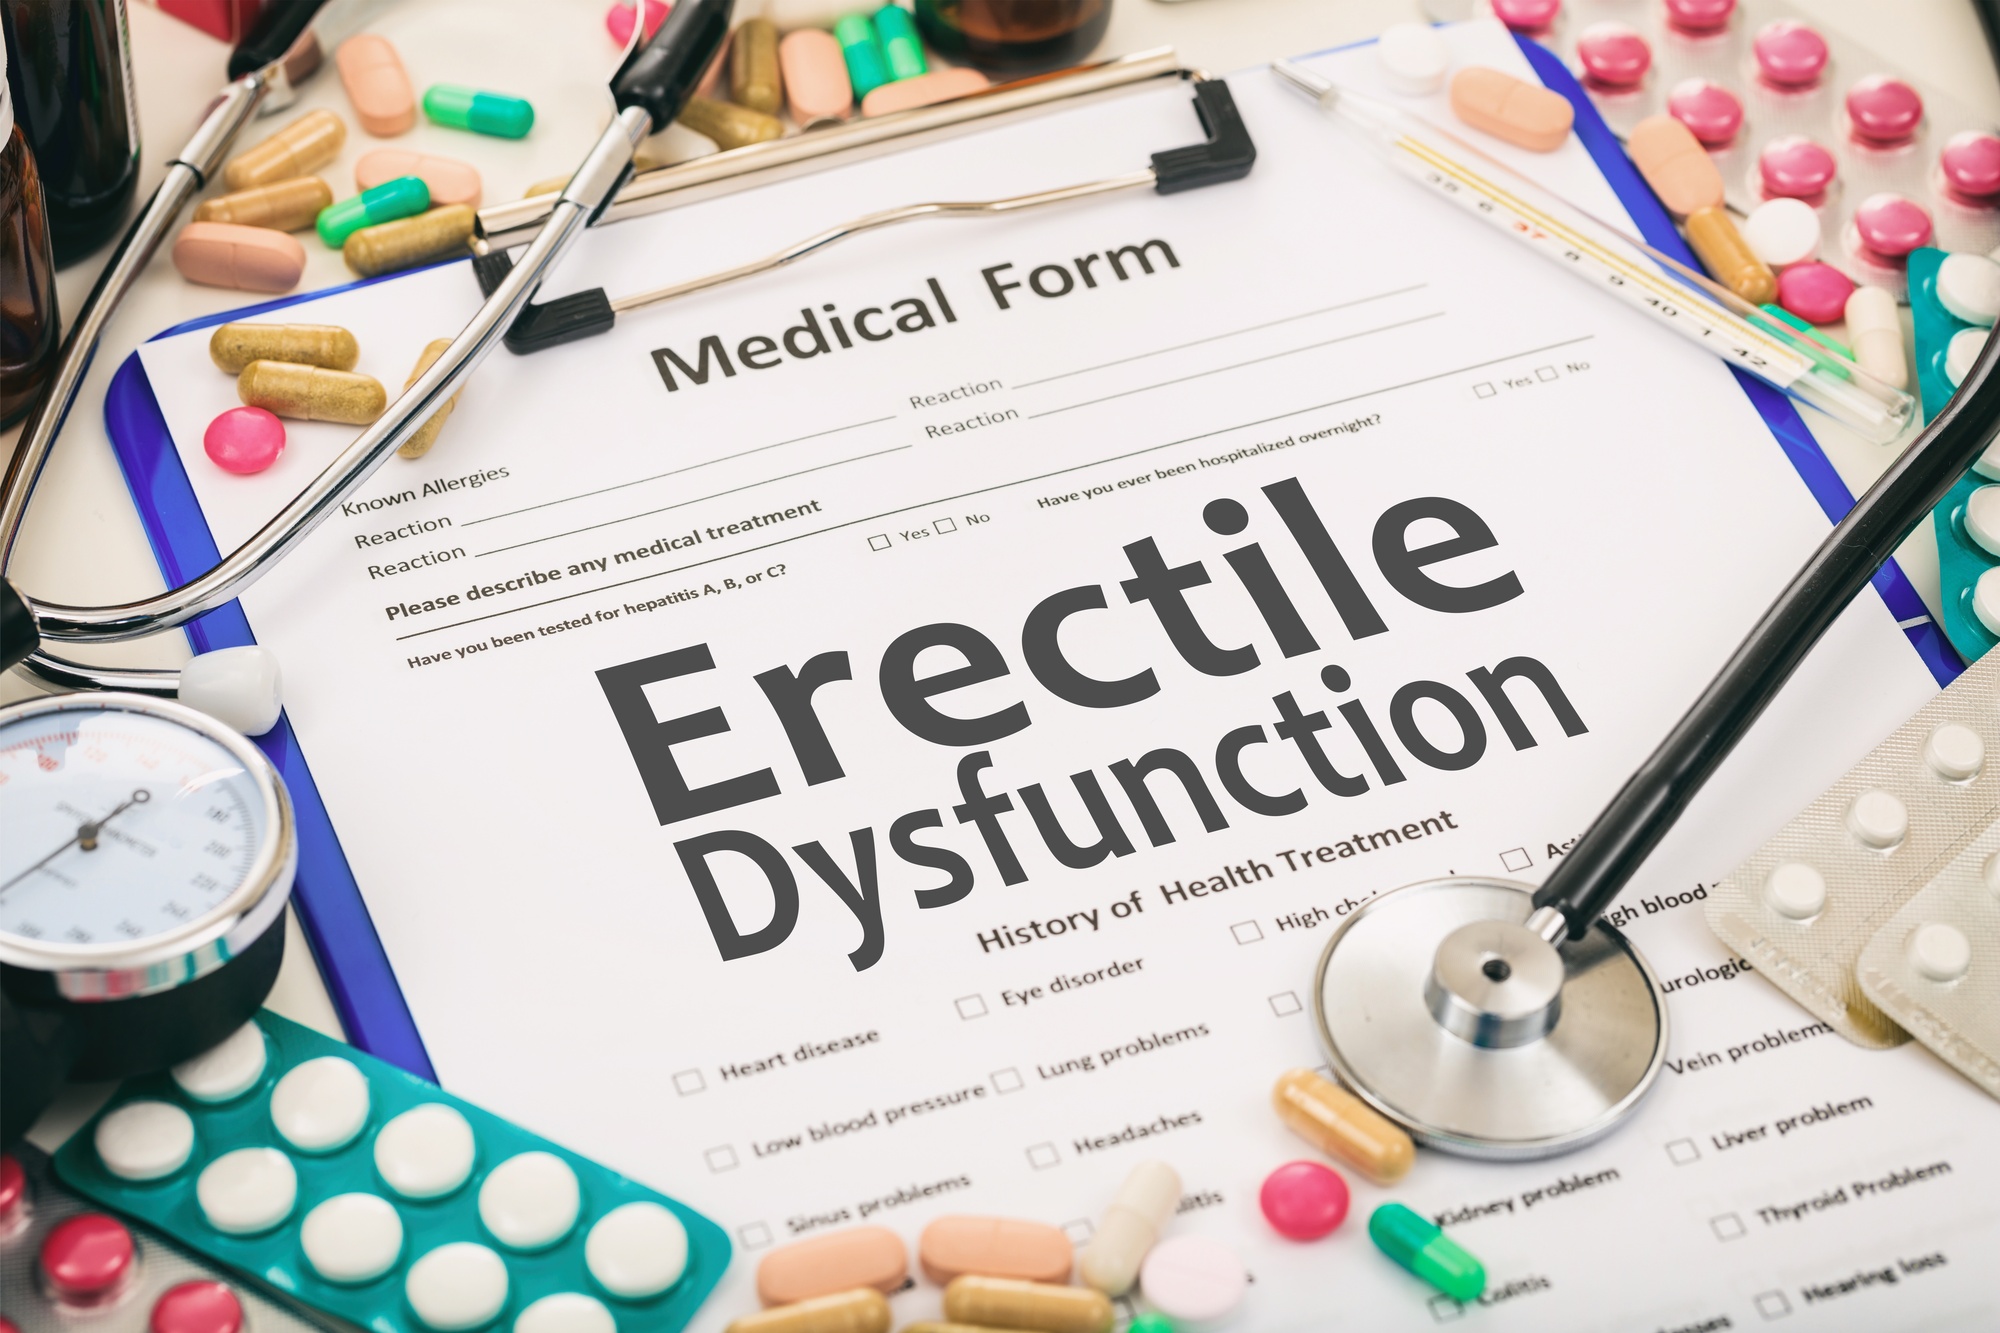 Medical form with Erectile Dysfunction Diagnosis